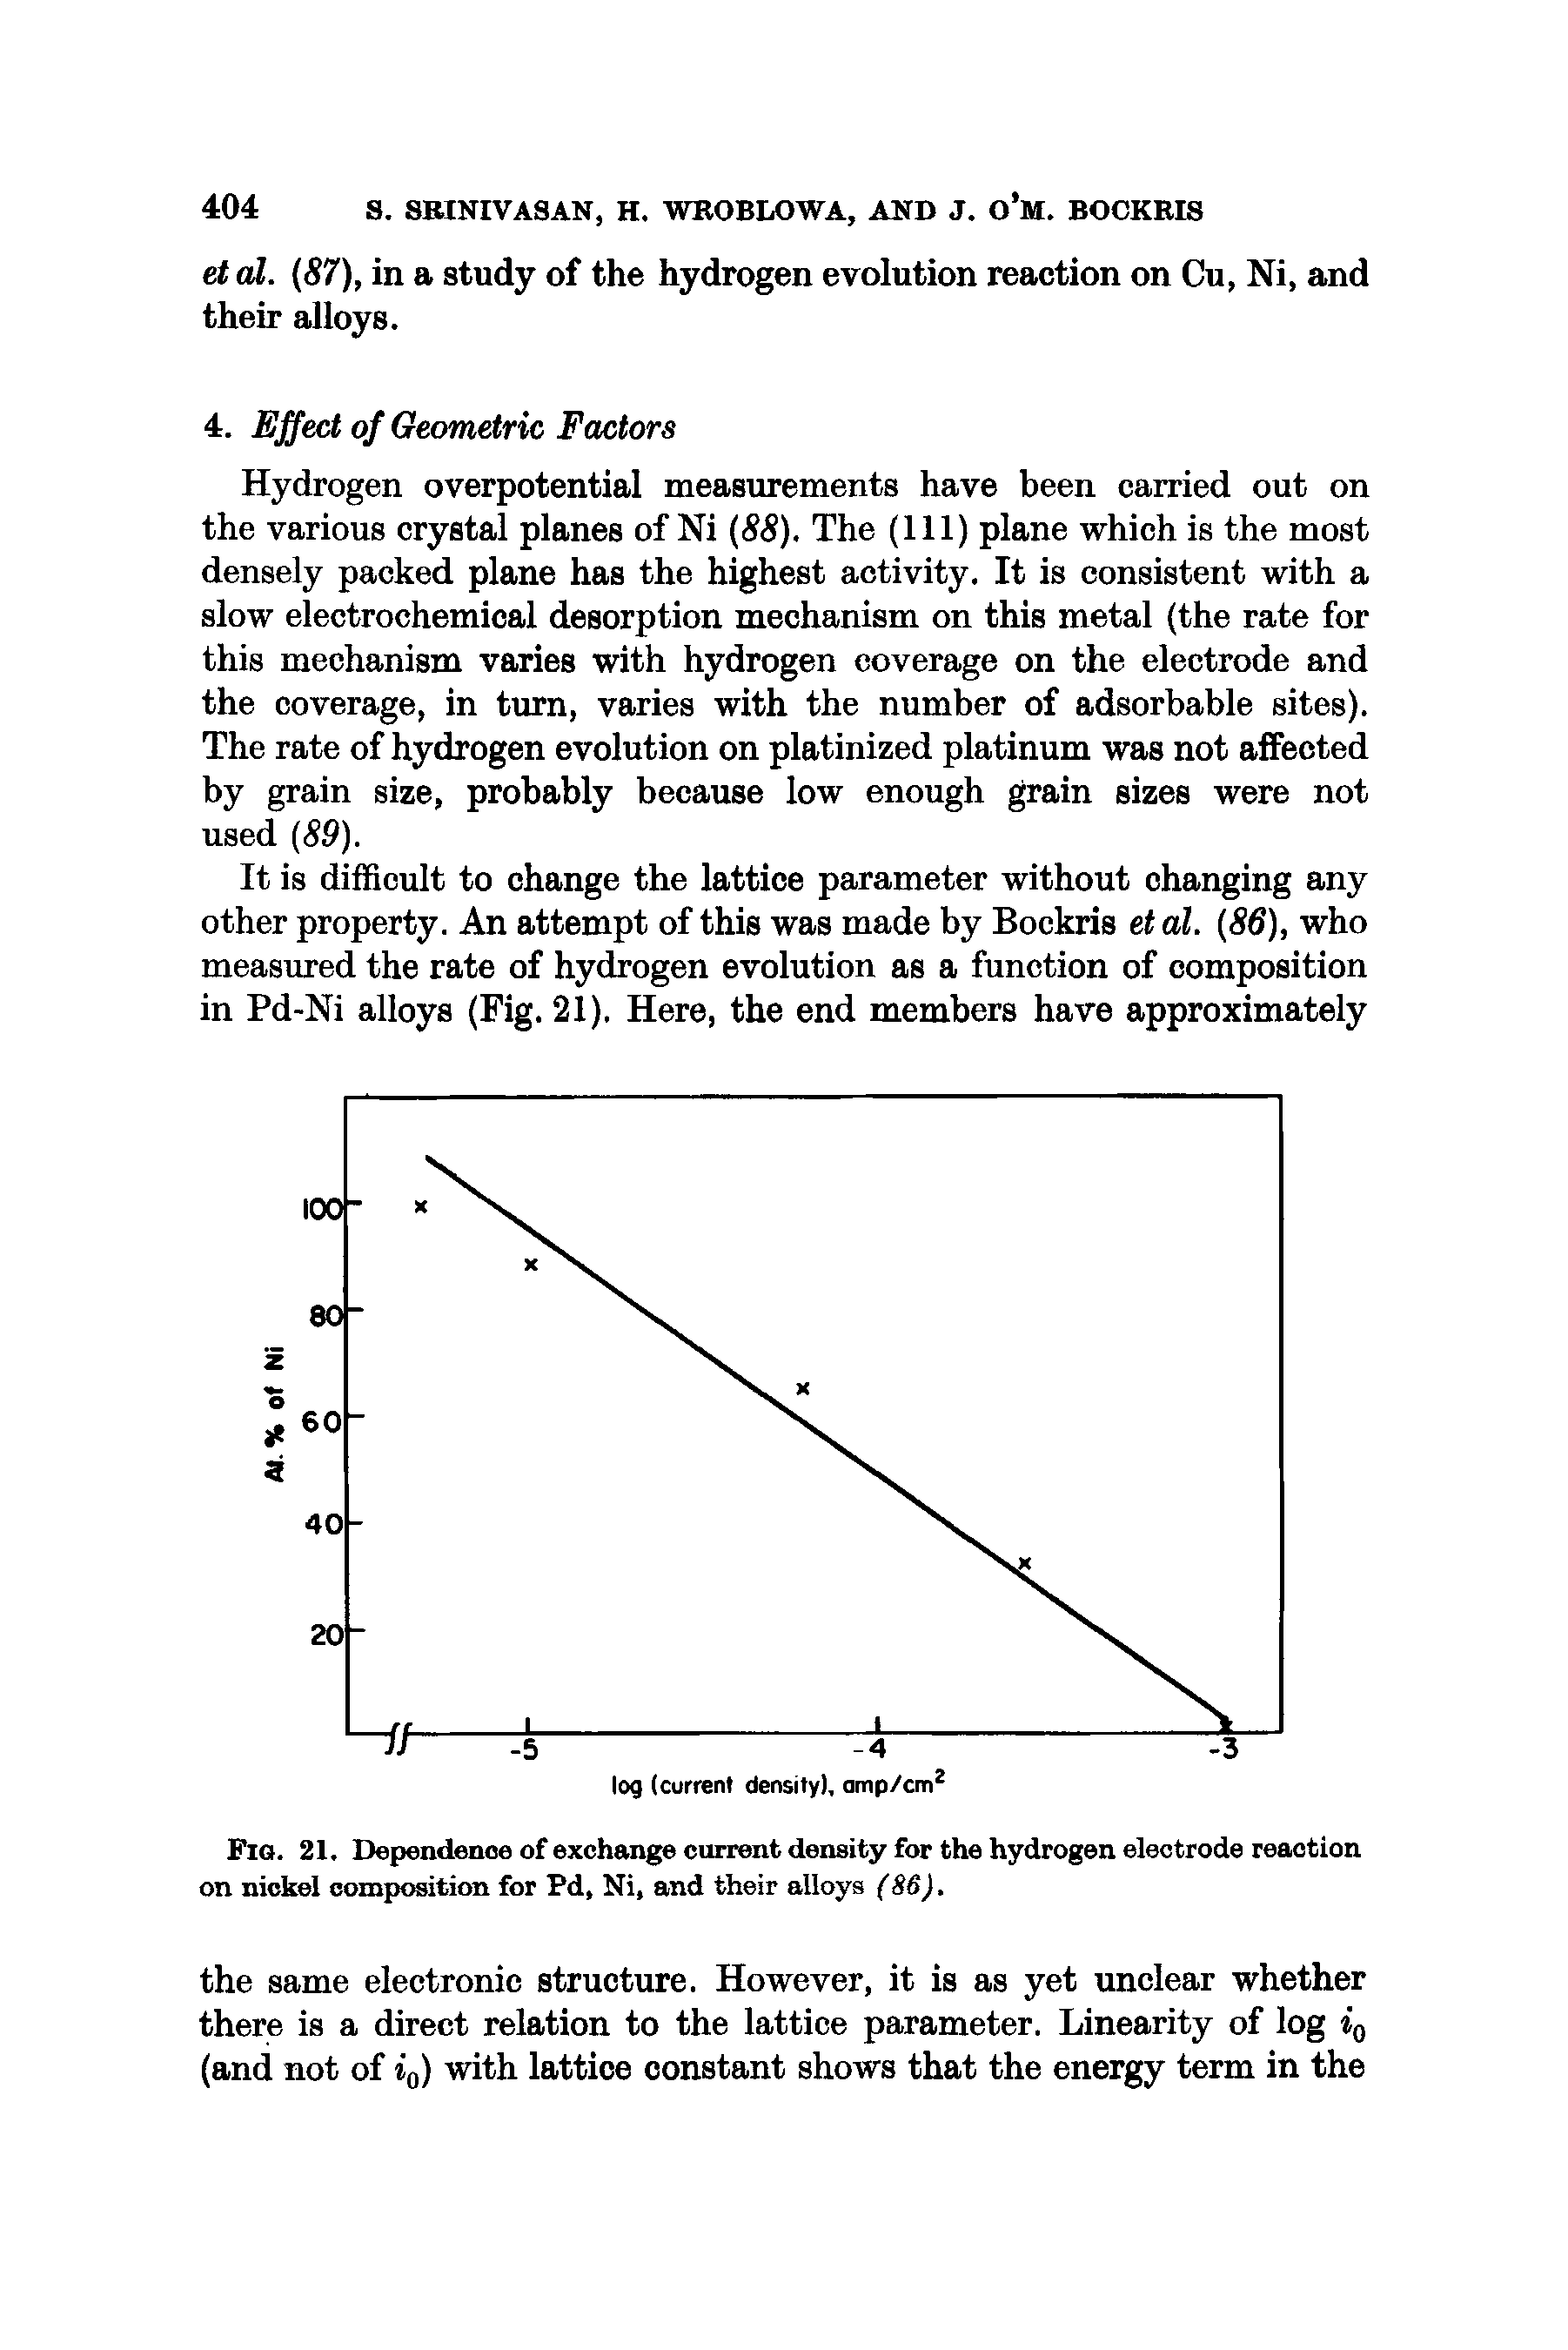 Fig. 21. Dependence of exchange current density for the hydrogen electrode reaction on nickel composition for Pd, Ni, and their alloys (8S).